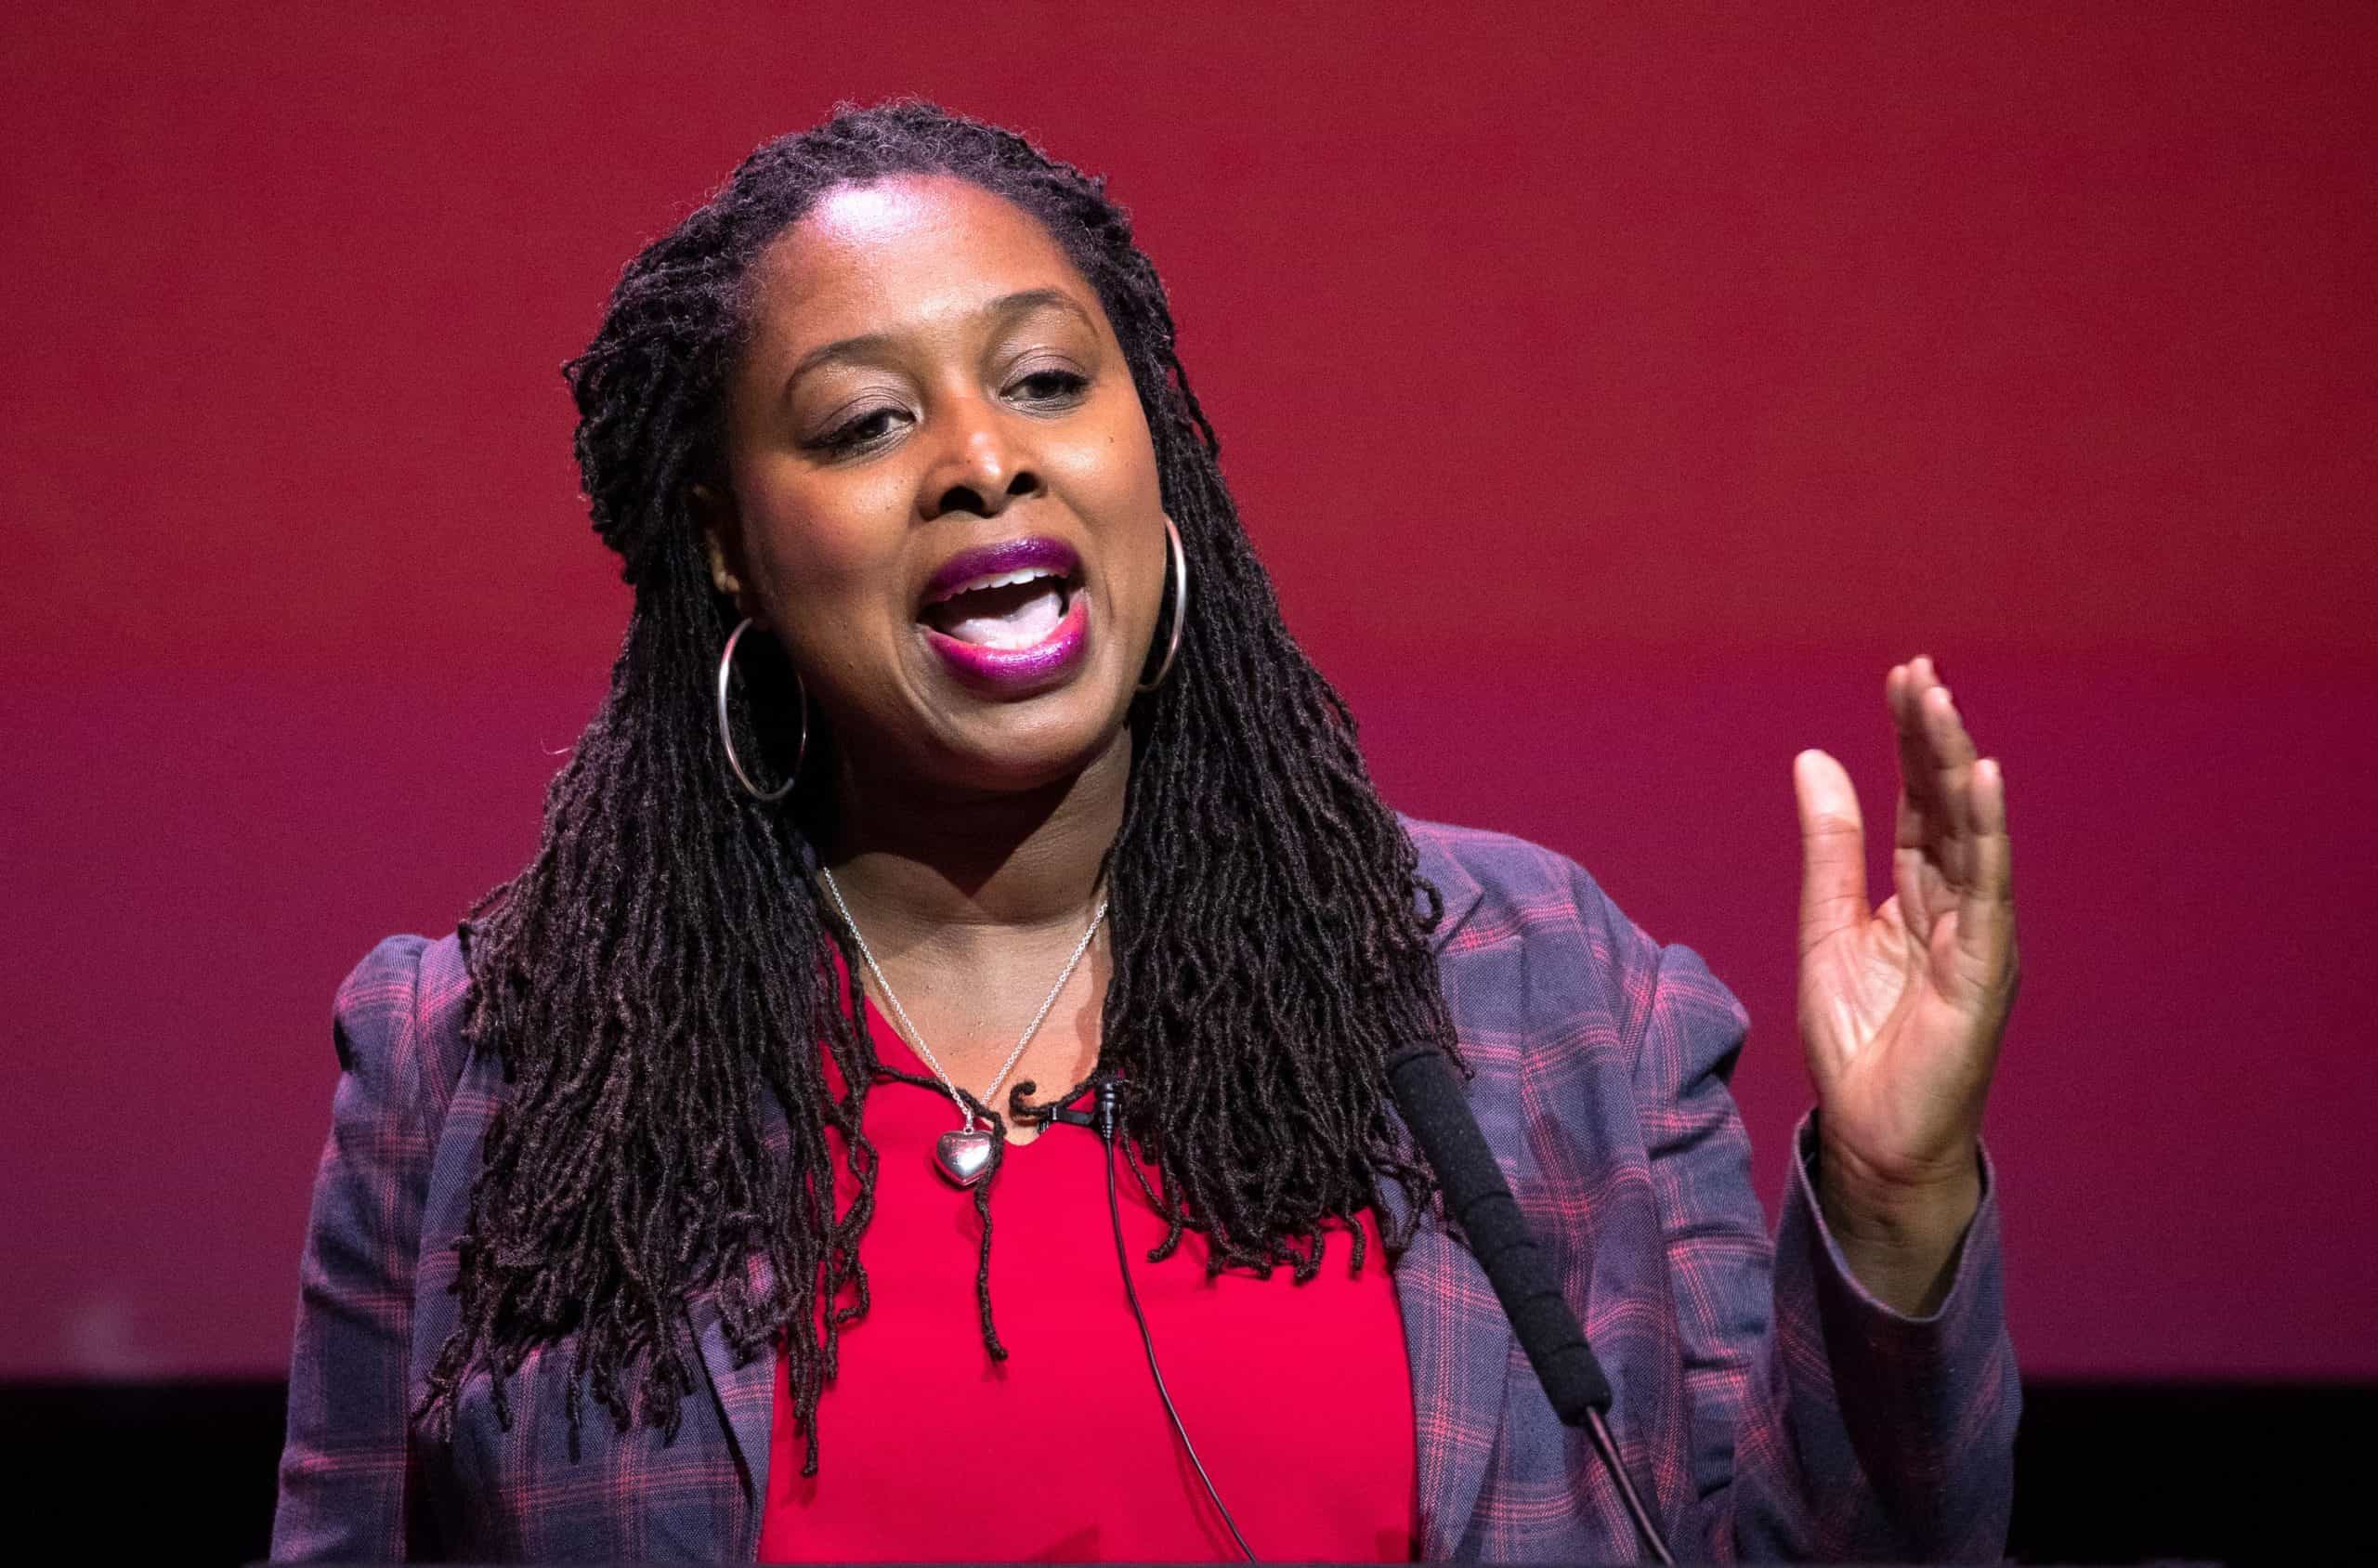 Dawn Butler says she has sought ‘extra police support’ after rise in far-right abuse